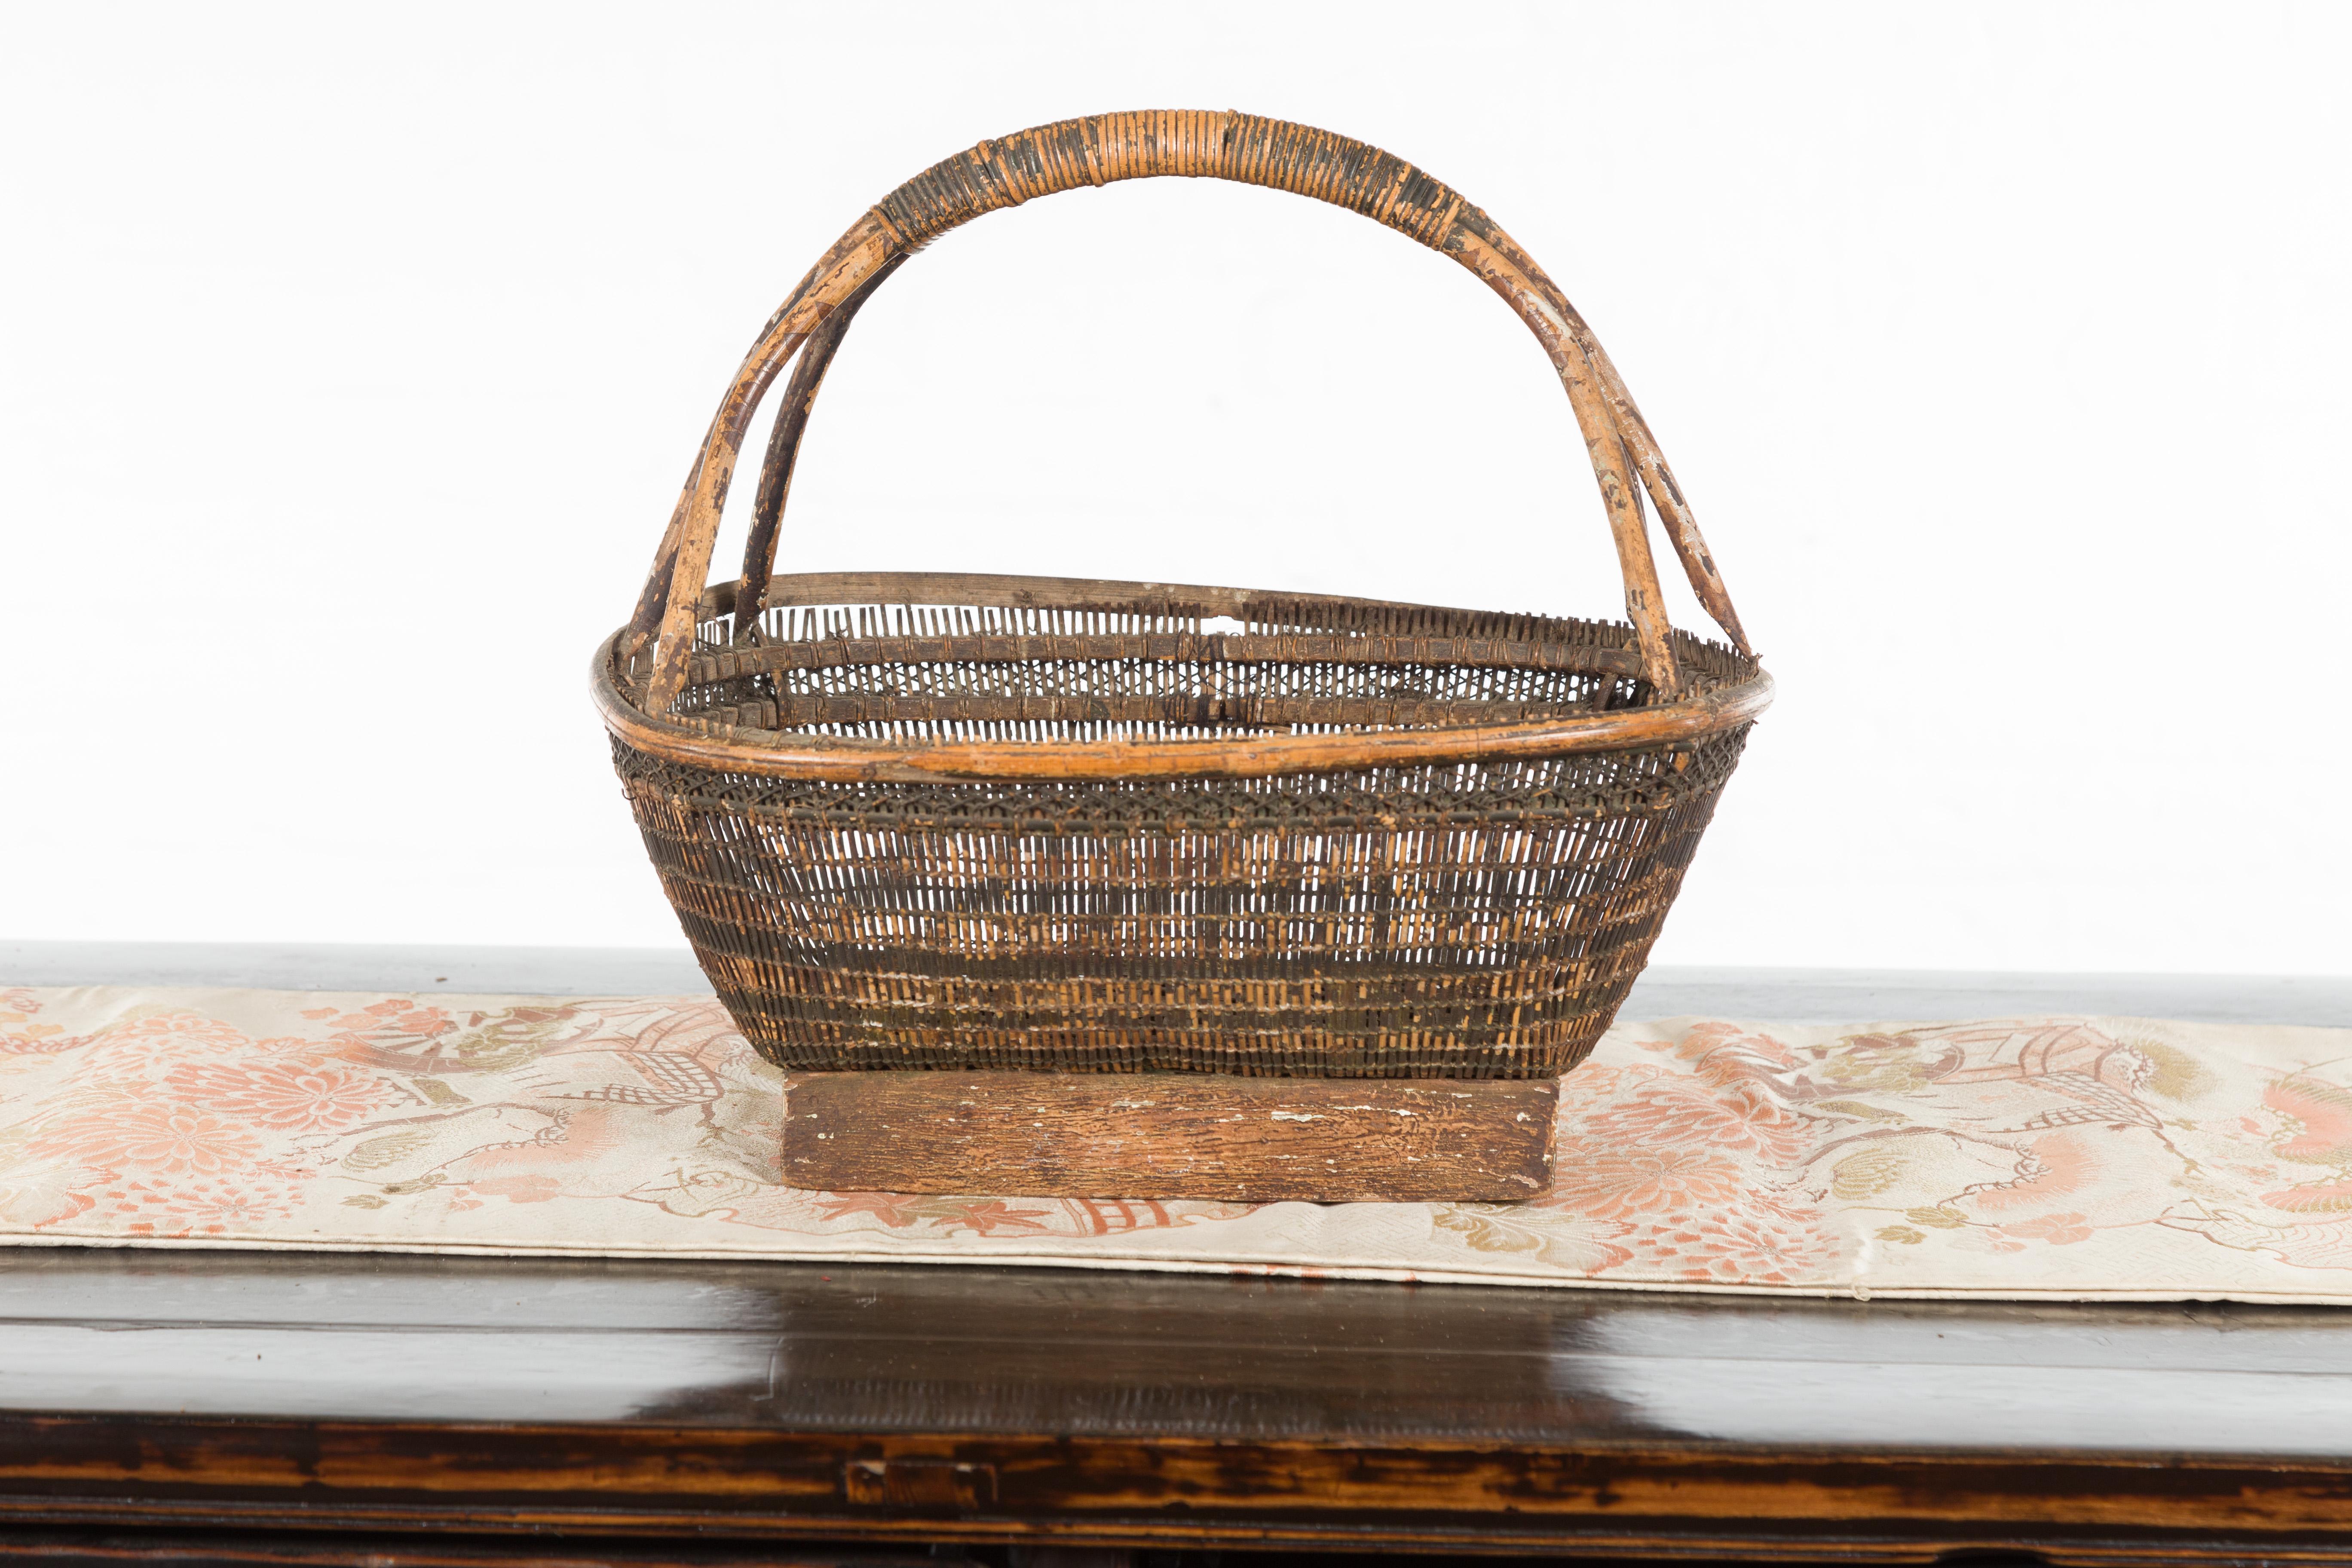 20th Century Chinese Rustic Vintage Woven Rattan Market Basket with Large Handle and Base